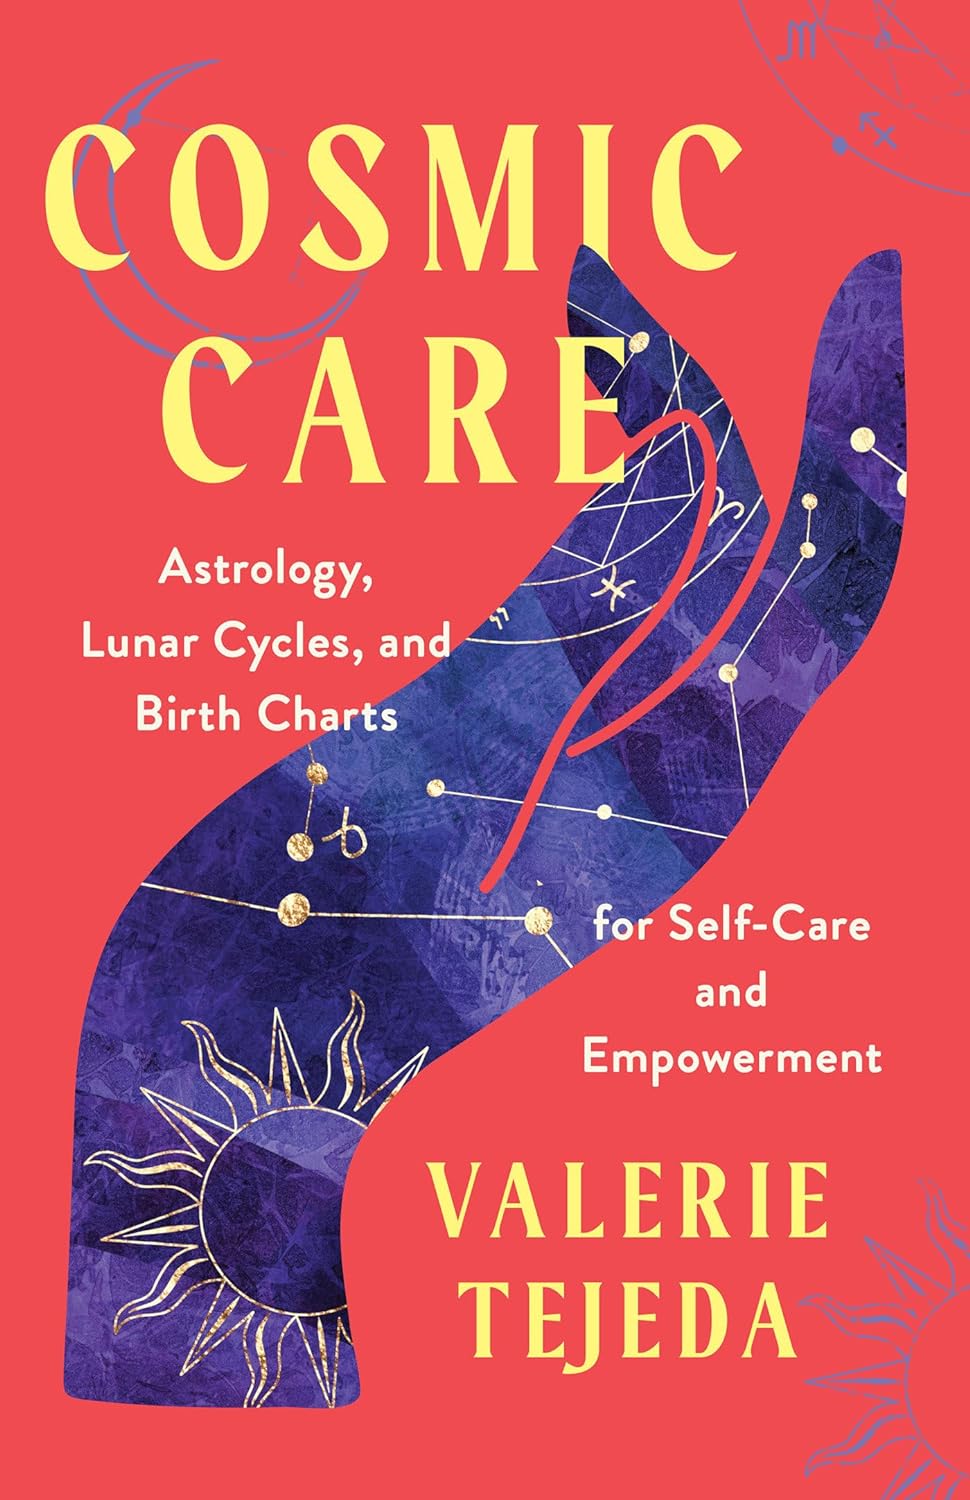 Cosmic Care ASTROLOGY, LUNAR CYCLES, AND BIRTH CHARTS FOR SELF-CARE AND EMPOWERMENT (PB)